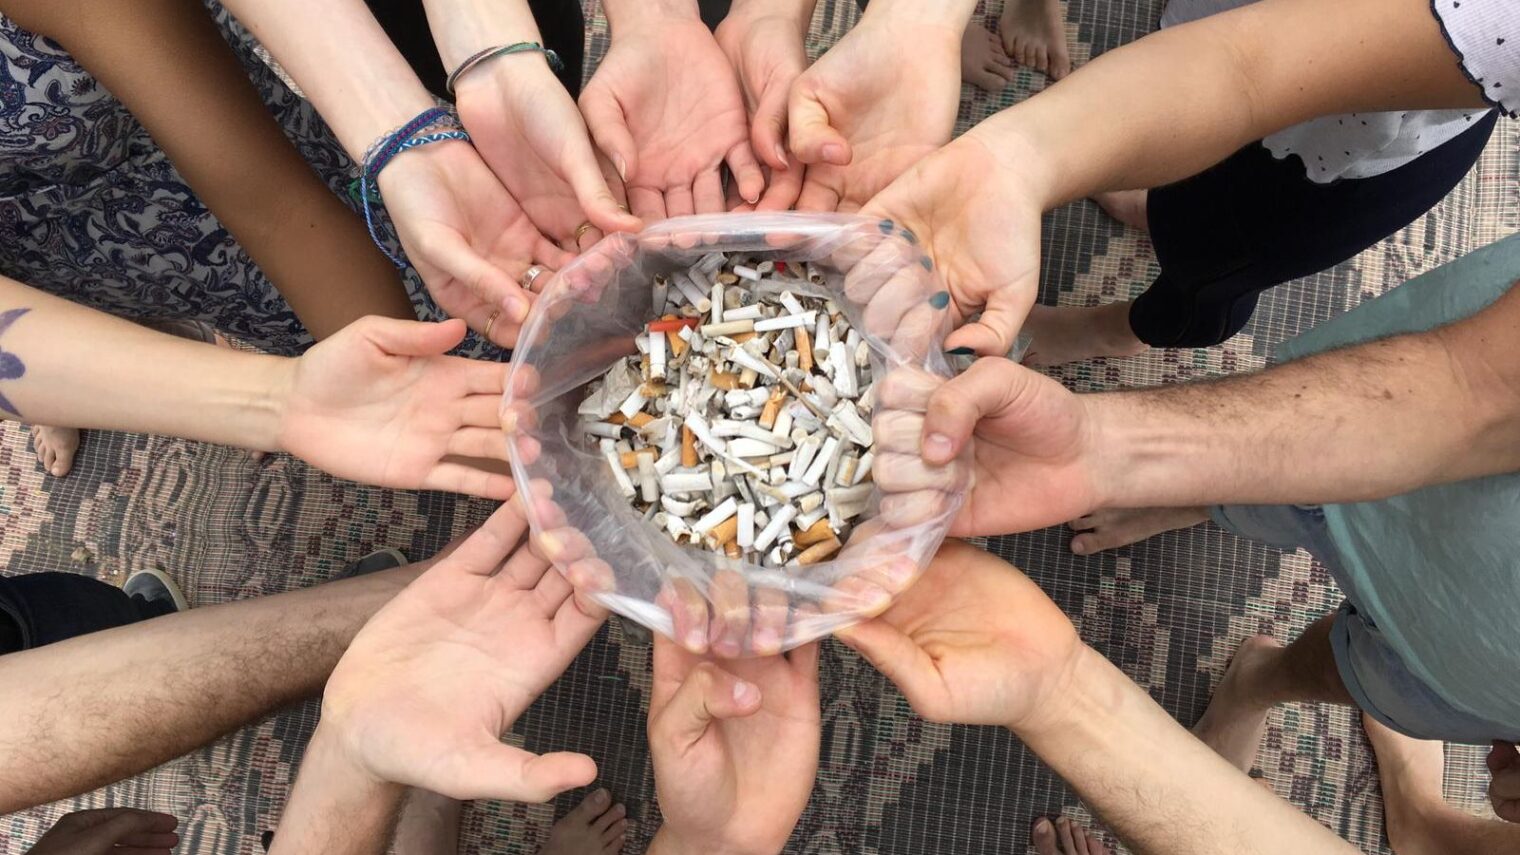 Clean the Butts have already removed 160,000 toxic cigarette butts from Israel’s beaches. Photo courtesy Clean the Butts